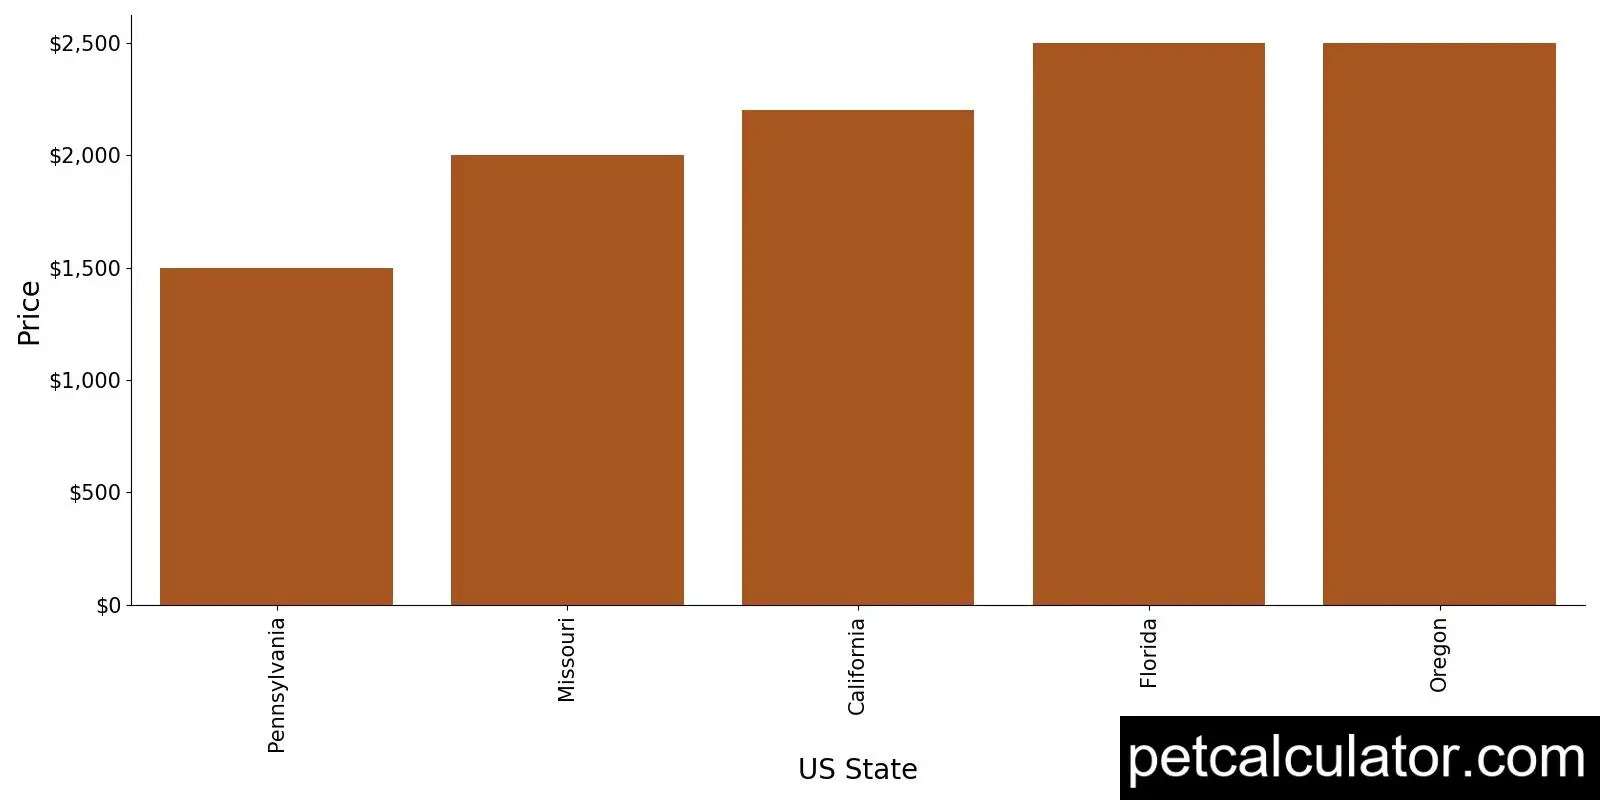 Price of Tibetan Terrier by US State 